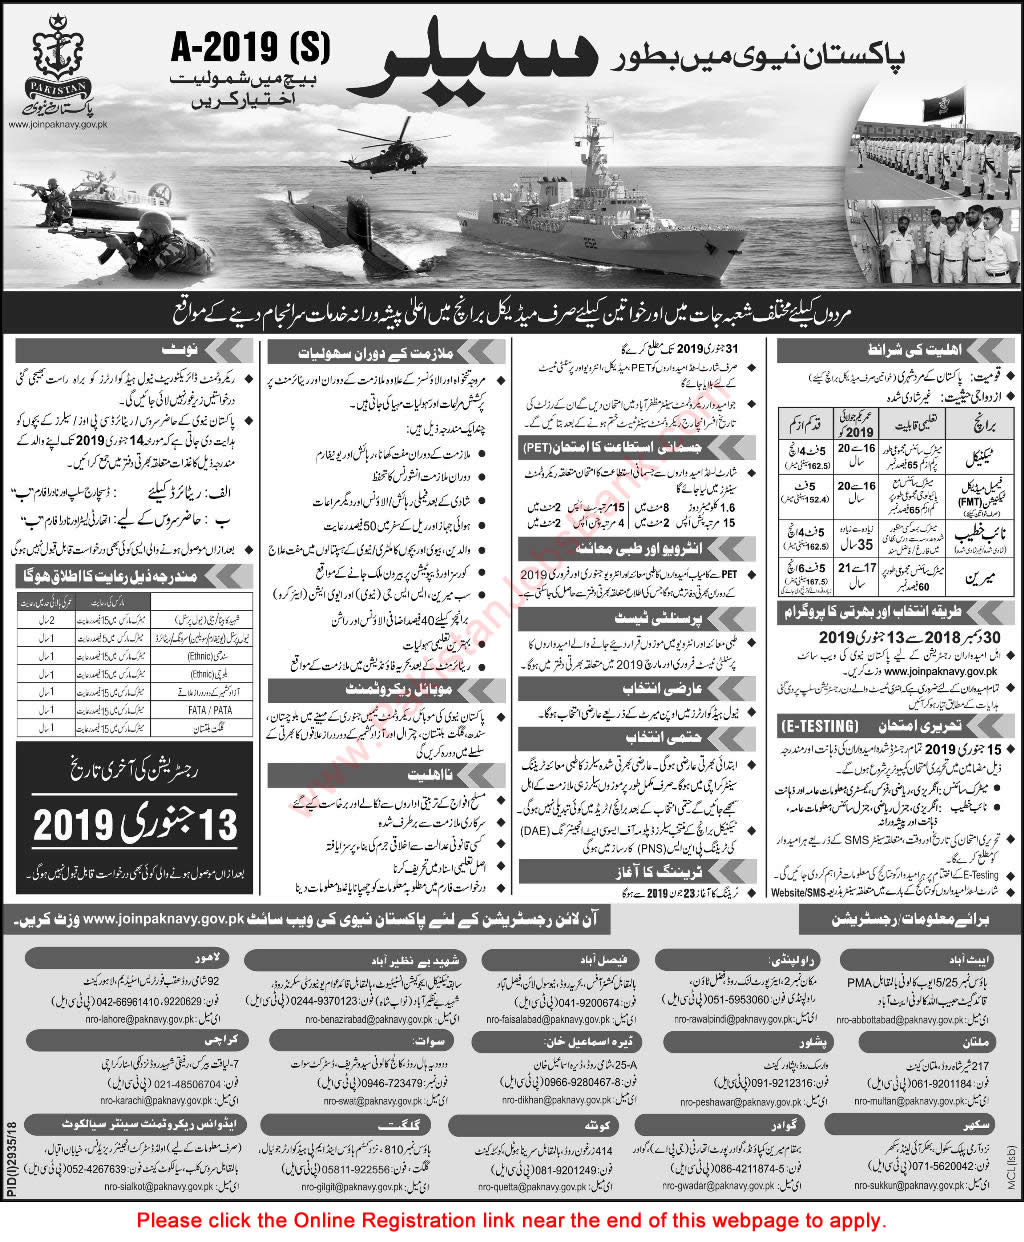 Join Pakistan Navy as Sailor 2019 Online Registration Jobs in A-2019 (S) Batch Latest